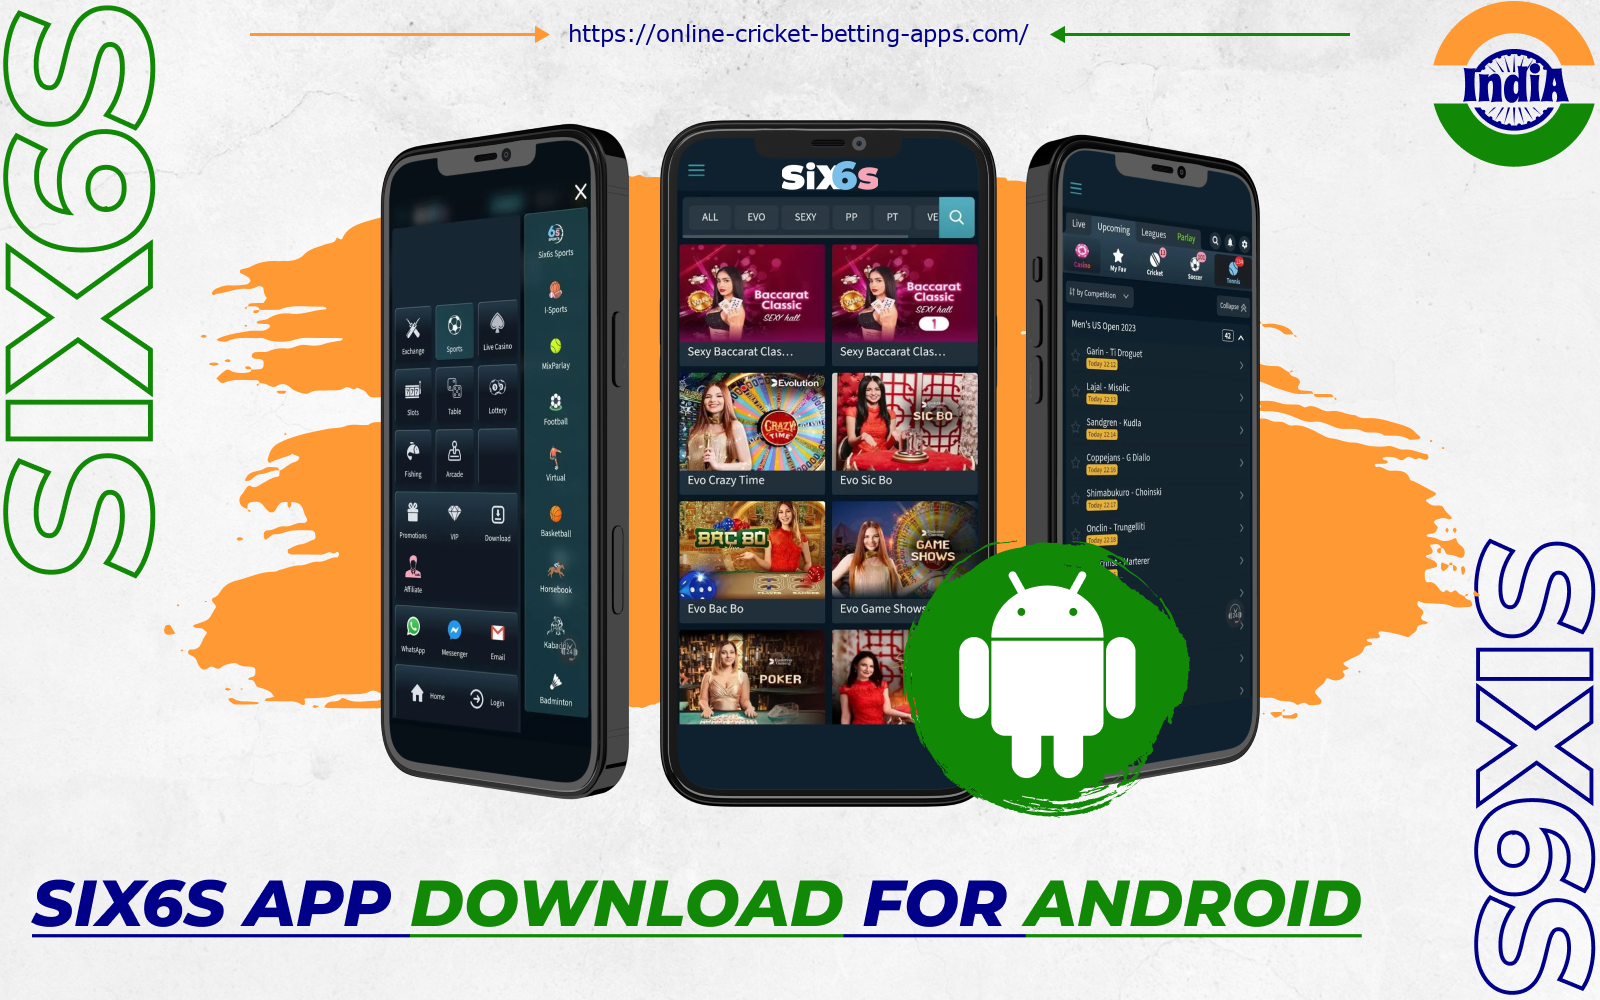 With the Six6s Android app, players from India can bet anytime and anywhere on their devices